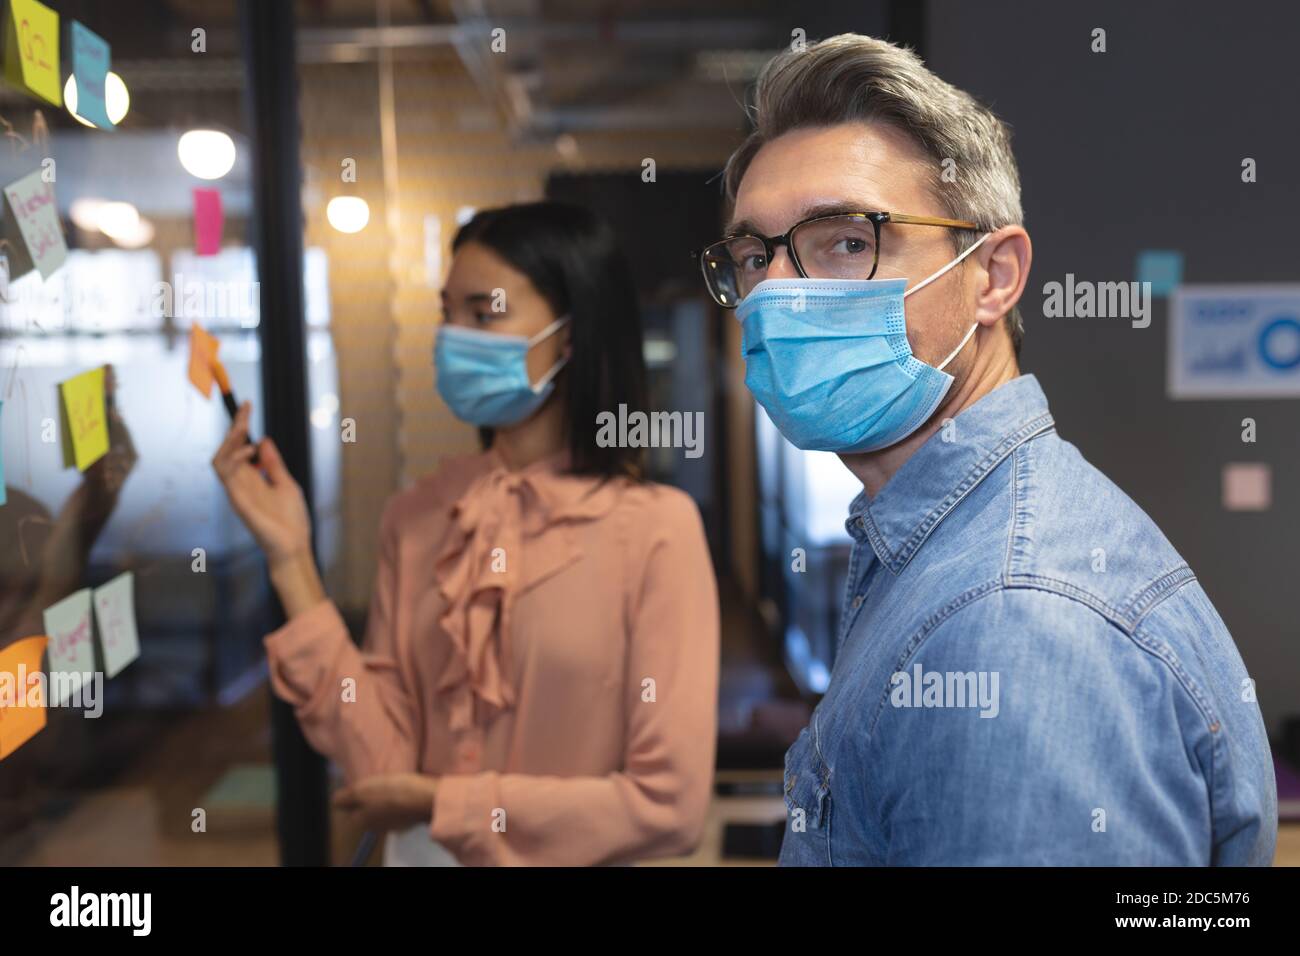 Portrait of caucasian man wearing face mask standing in modern office Stock Photo